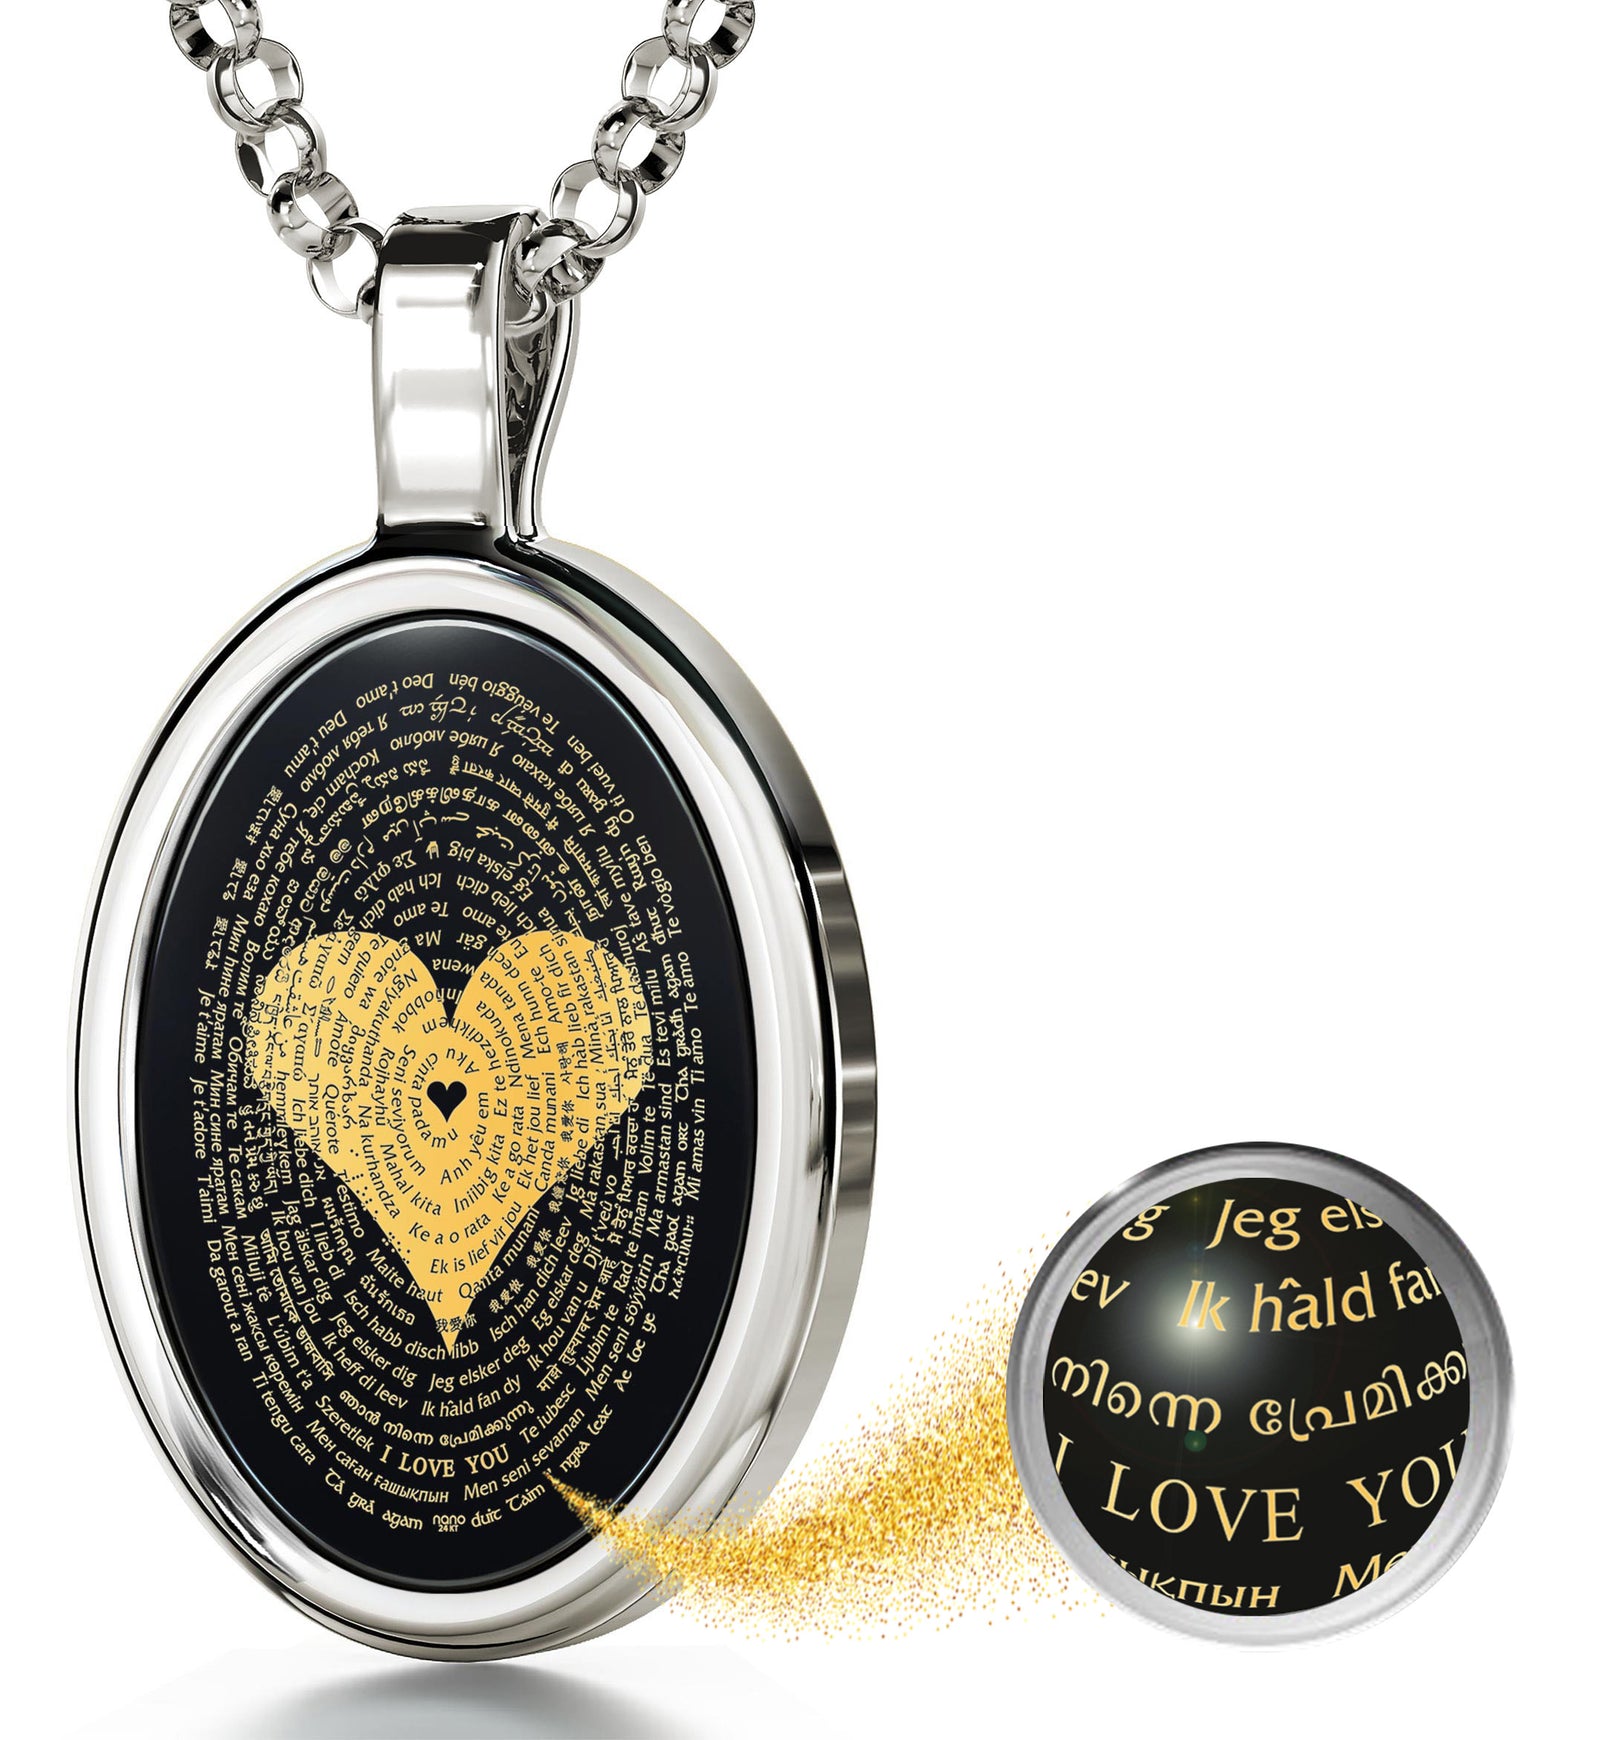 24kinscribed120 languages i love you necklace romanticgold anniversary gift for